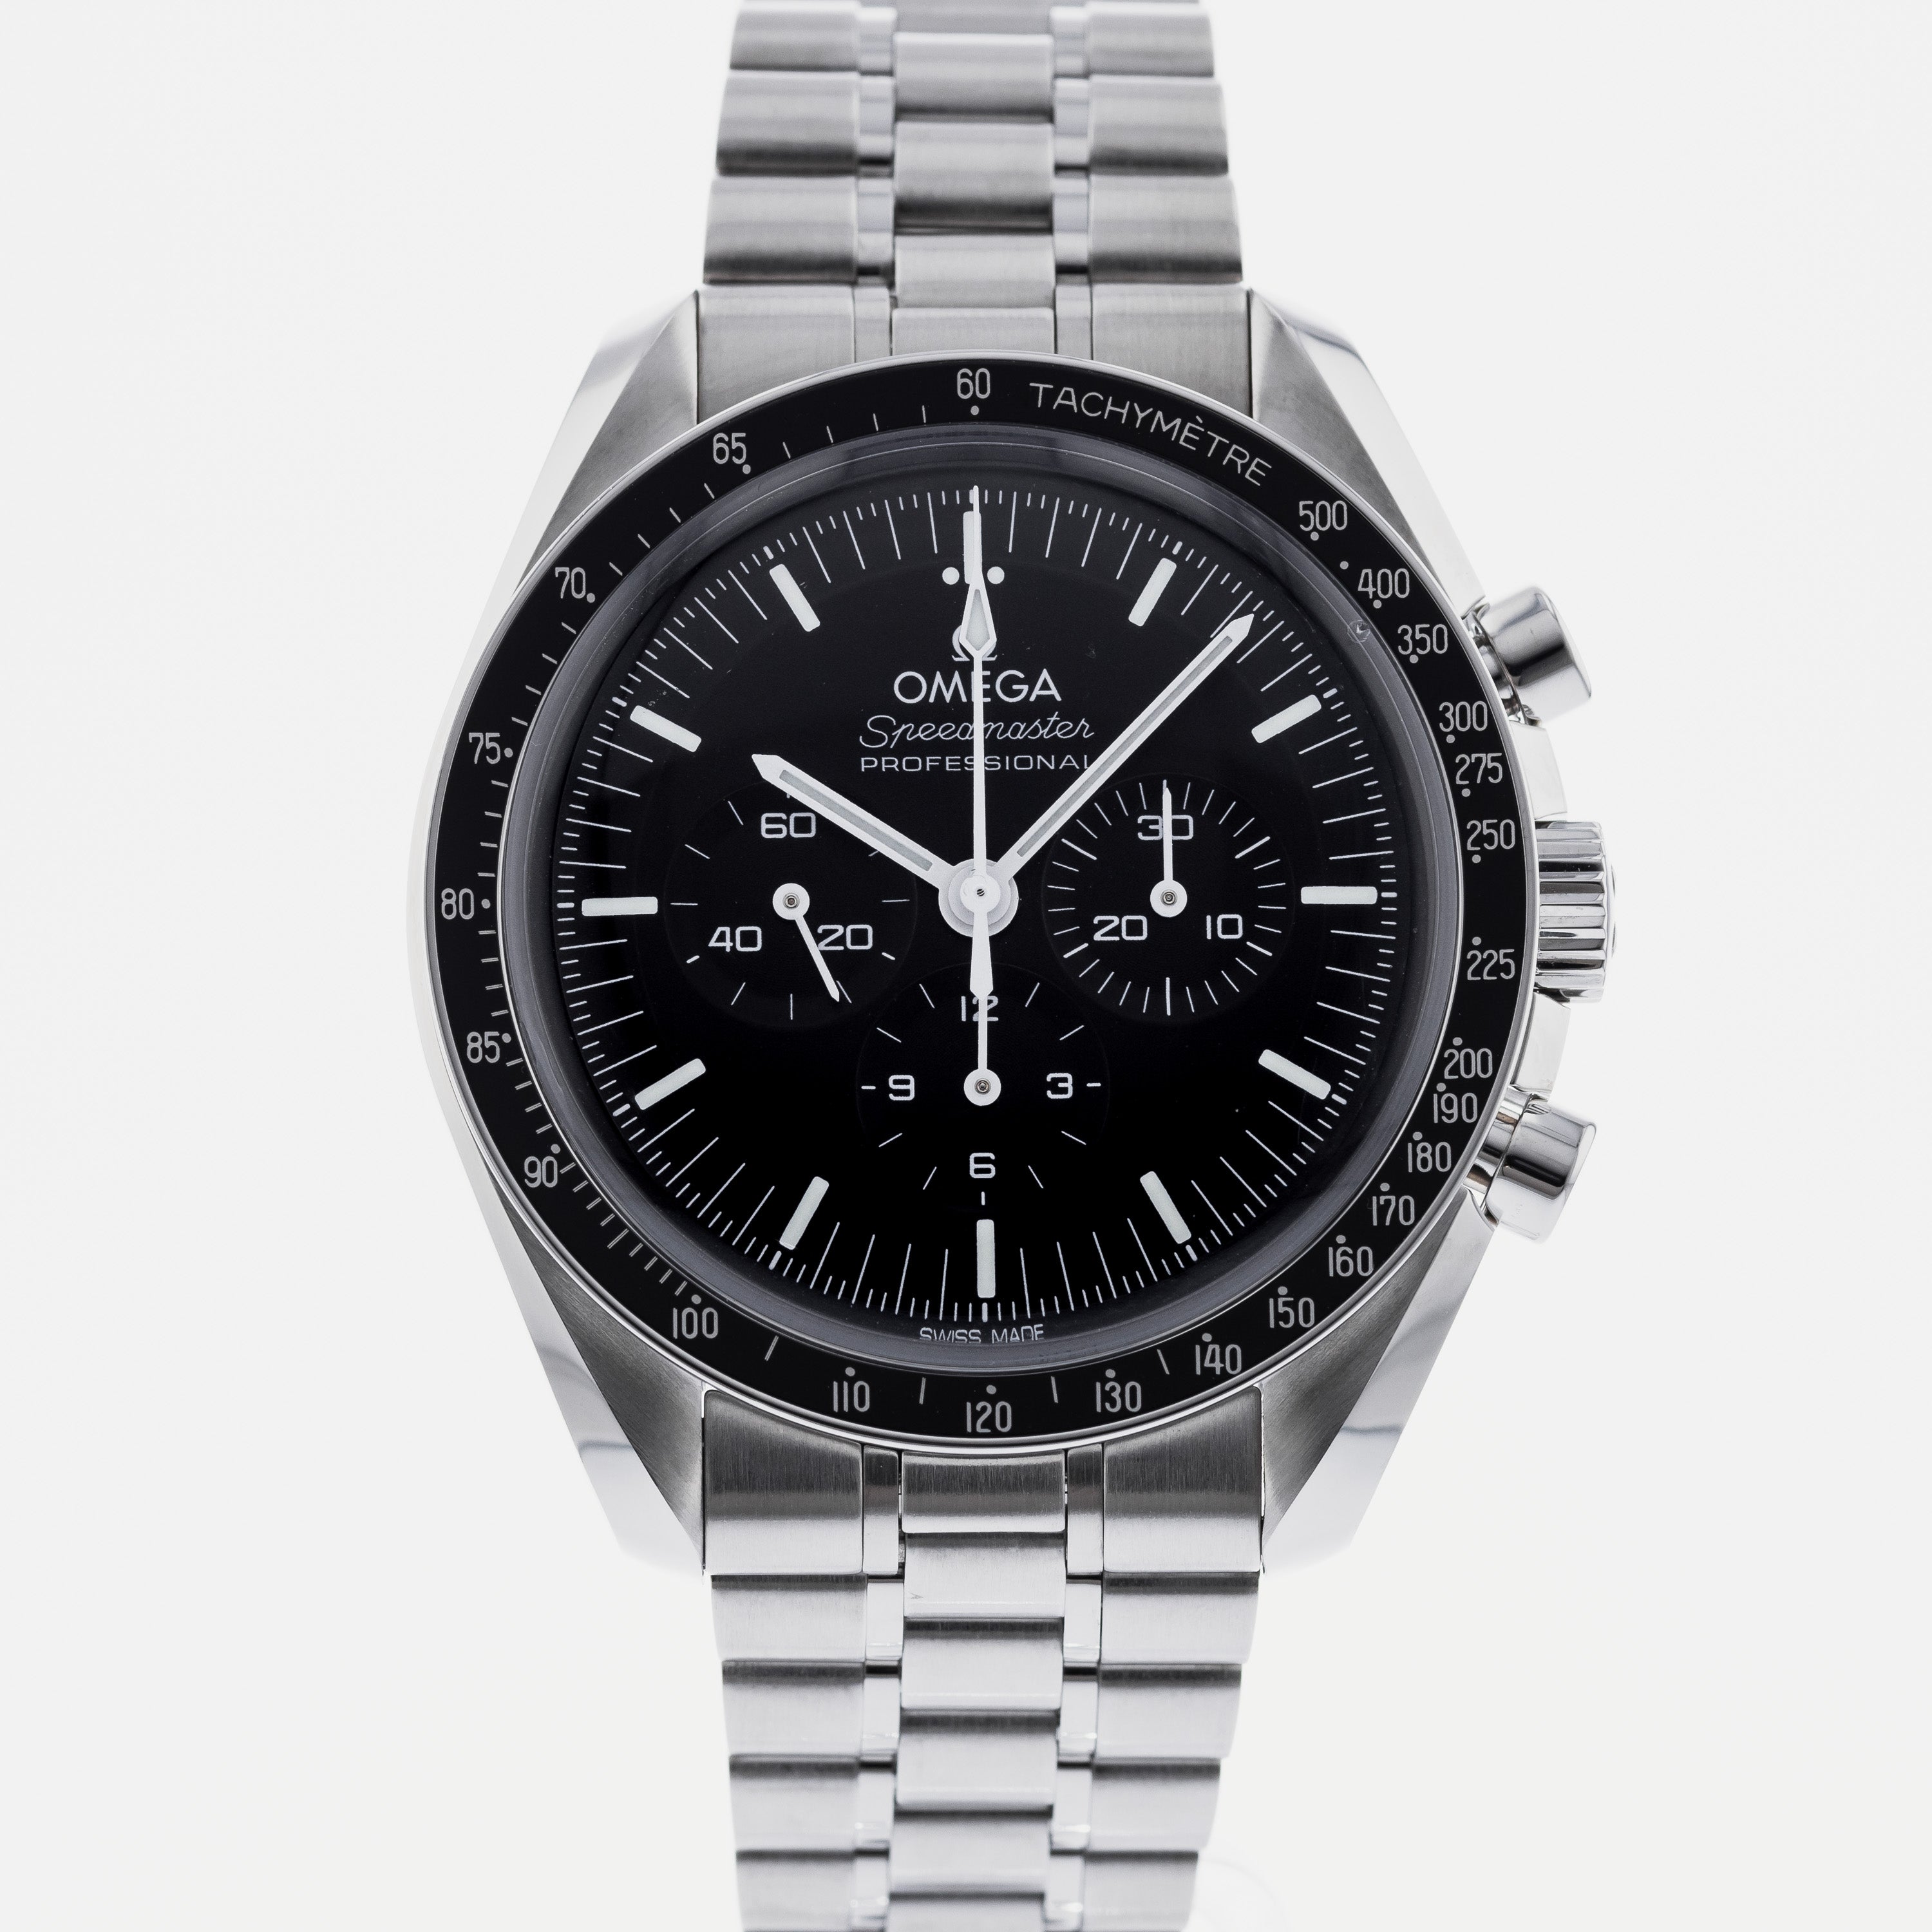 OMEGA Speedmaster Professional Moonwatch Co-Axial Master Chronometer Chronograph 310.32.42.50.01.001